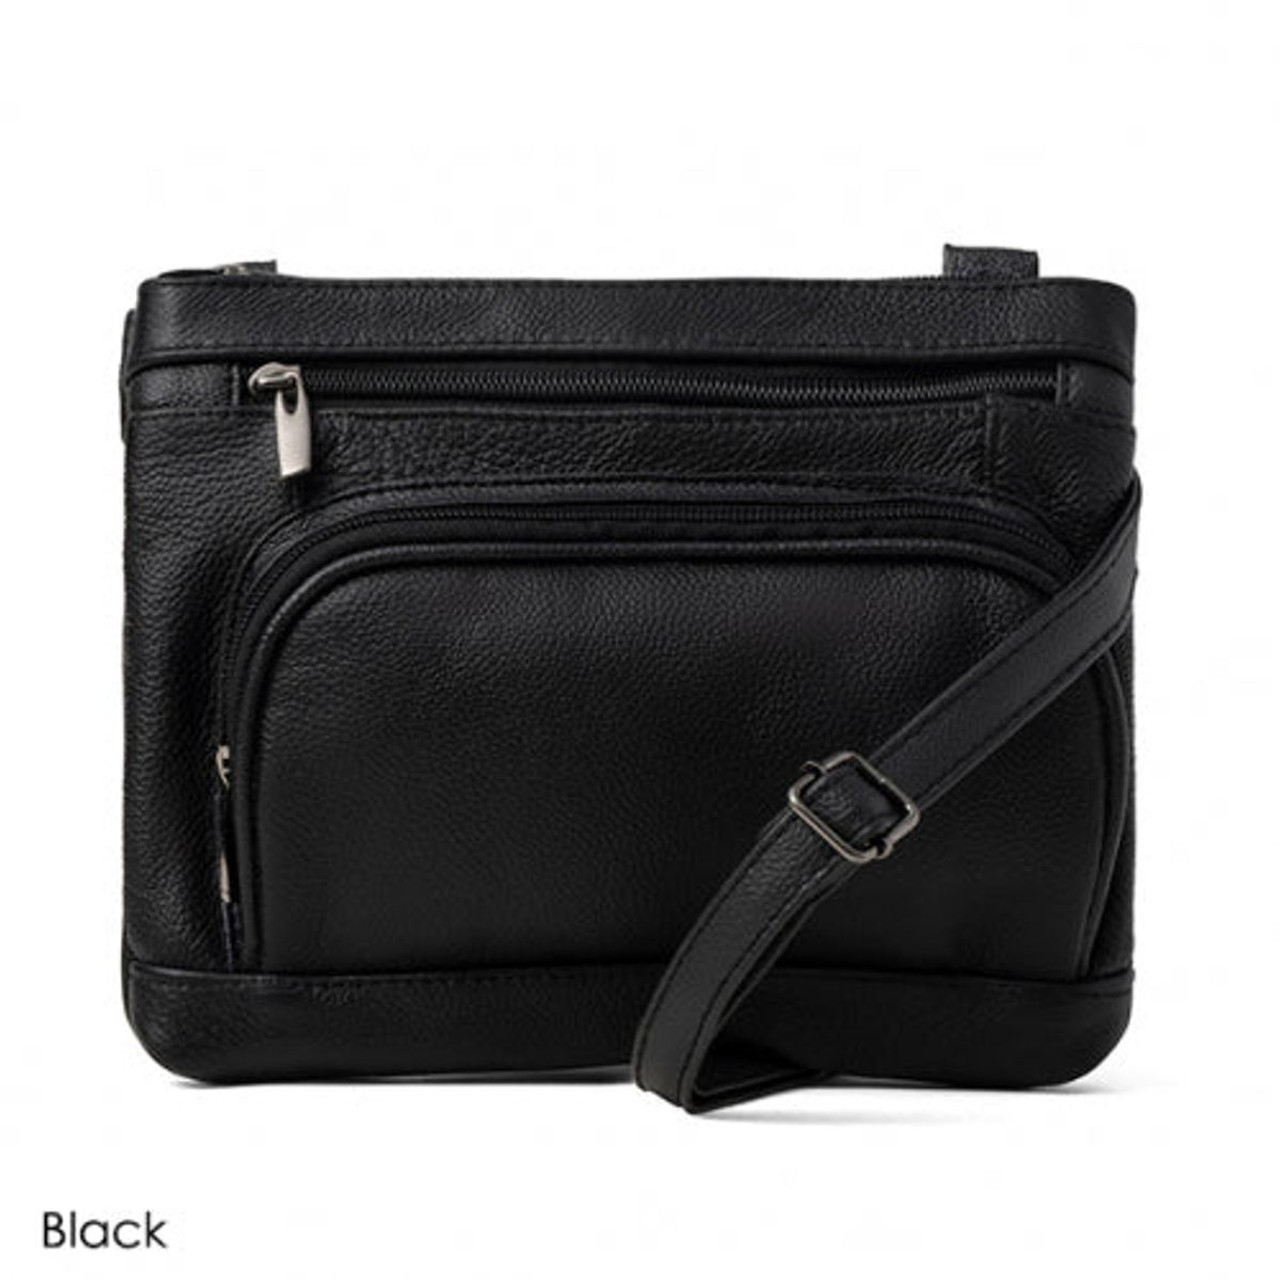 Super Soft Leather Wide Crossbody Bag product image